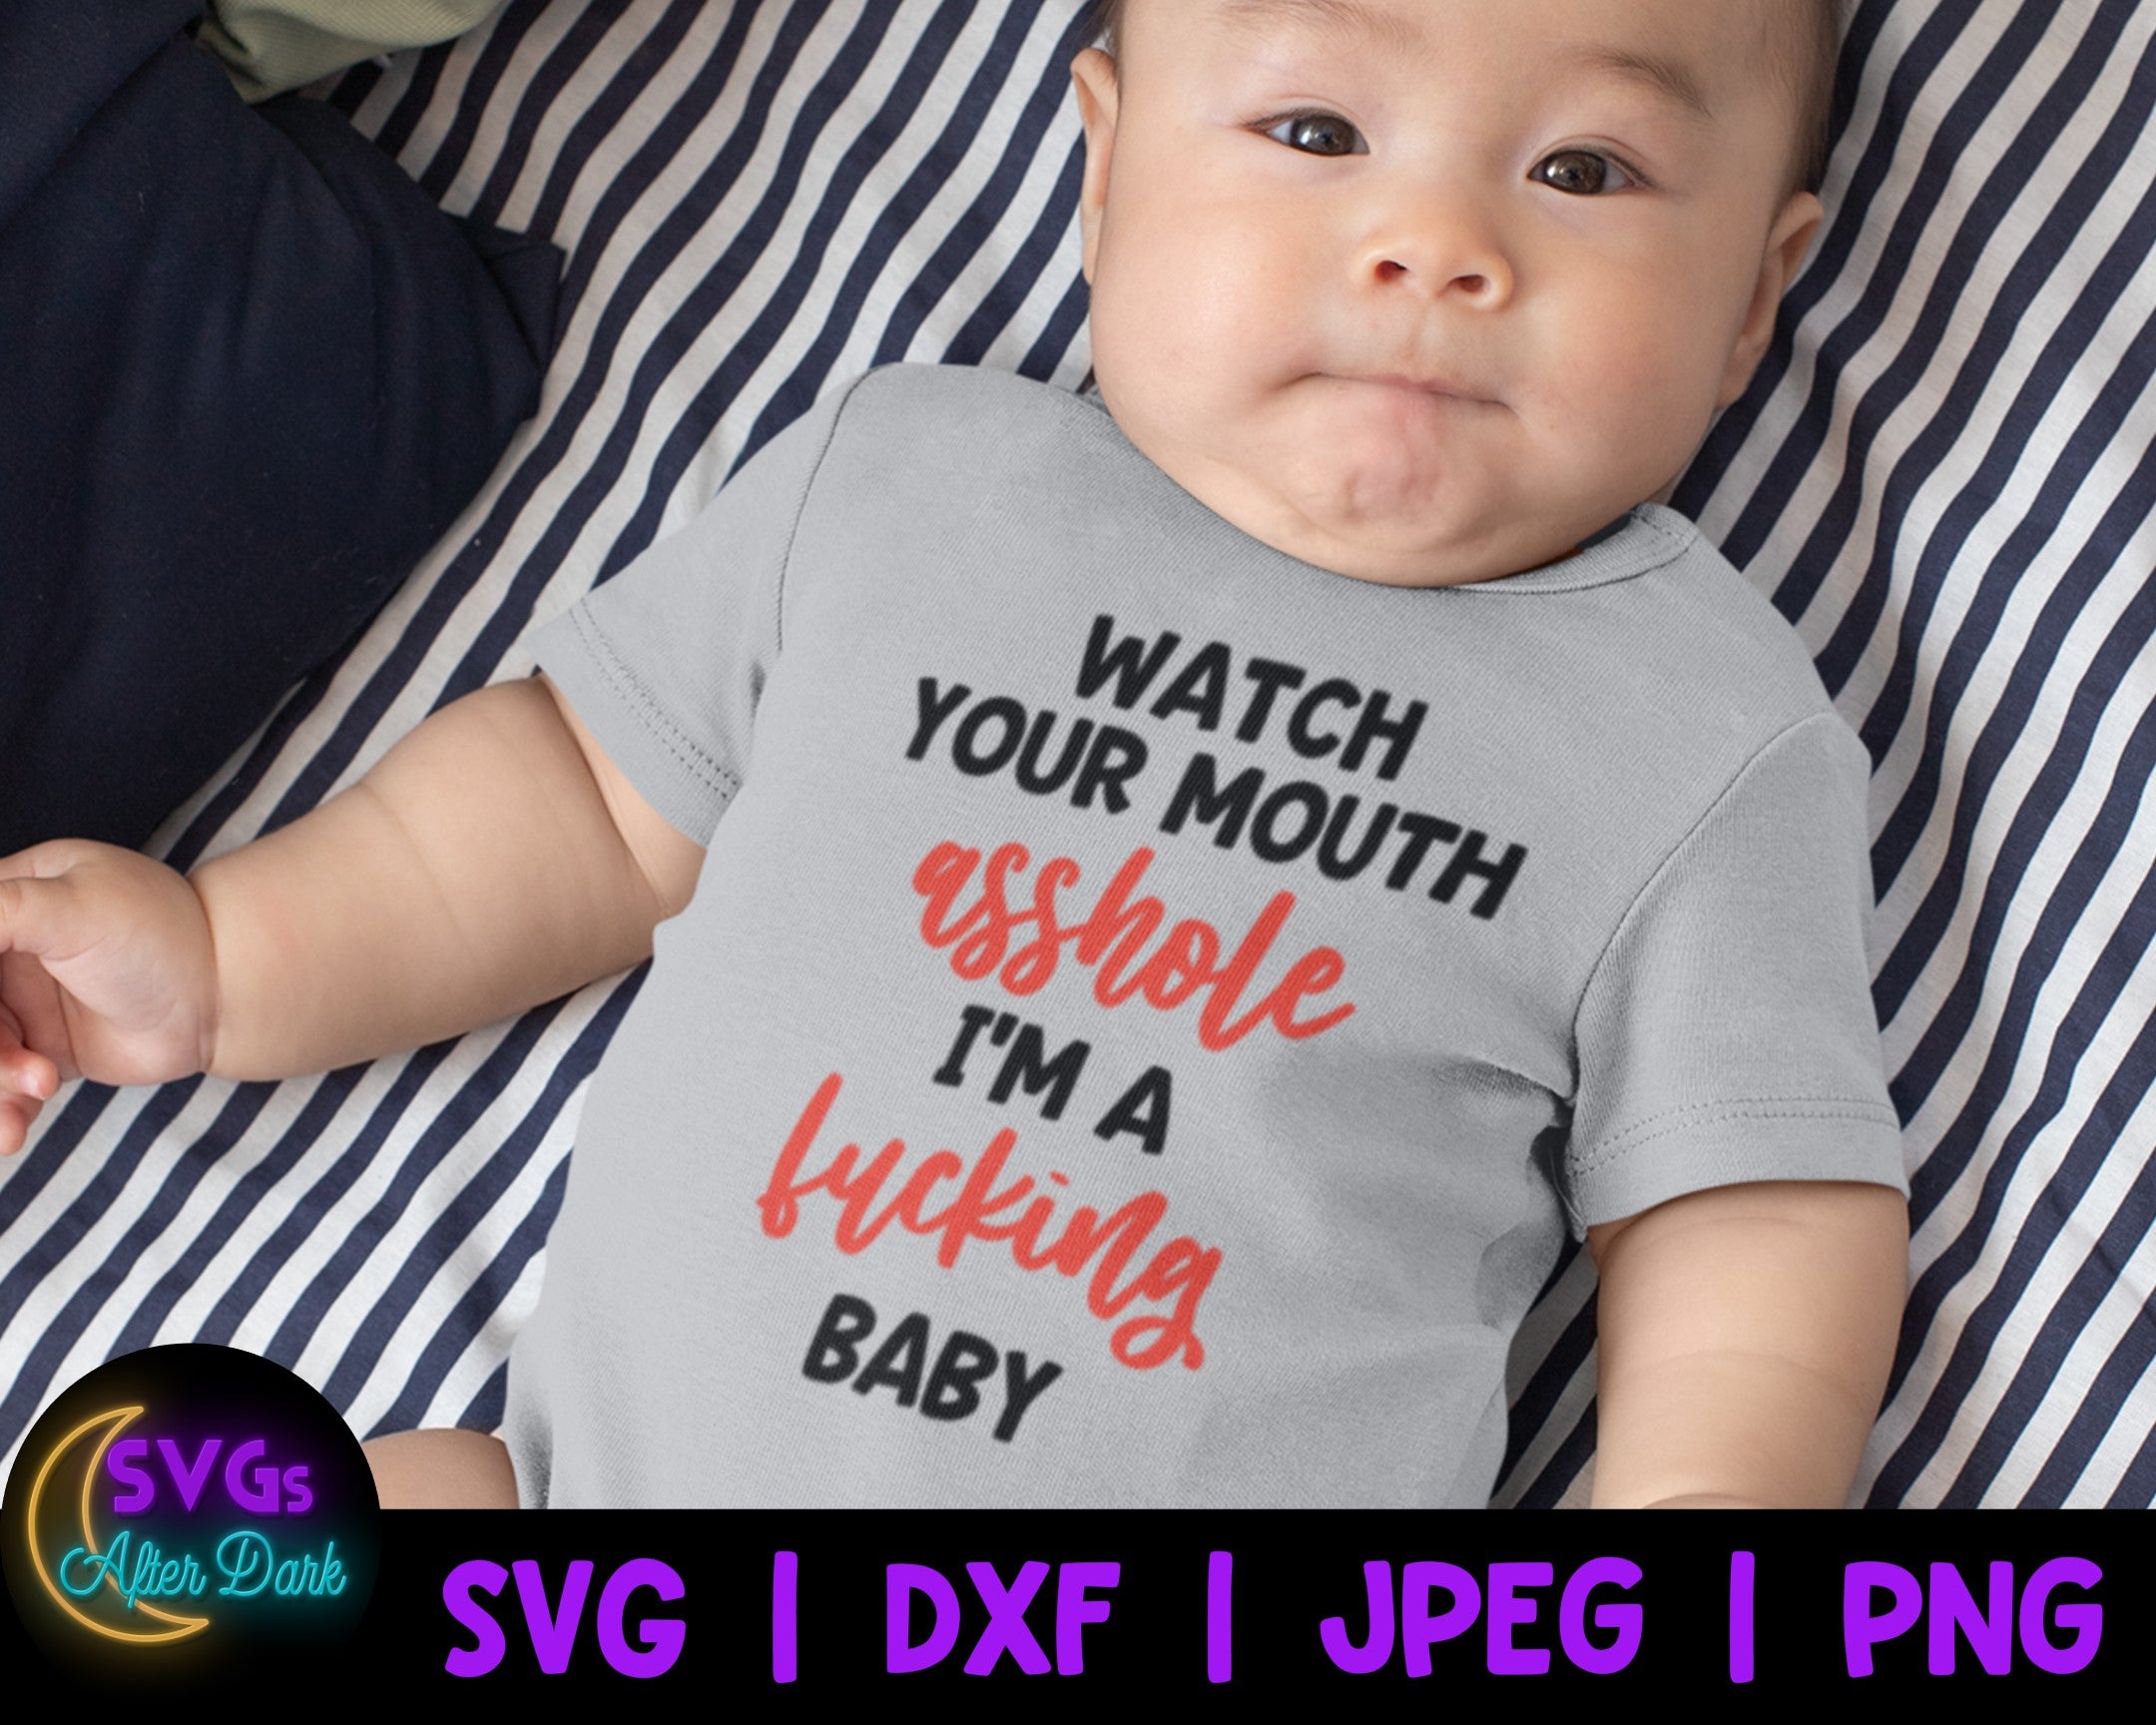 NSFW SVG - Crude and Funny Baby Bodysuit SVG Bundle - Naughty Bodysuit Bundle - Funny Kid outfits